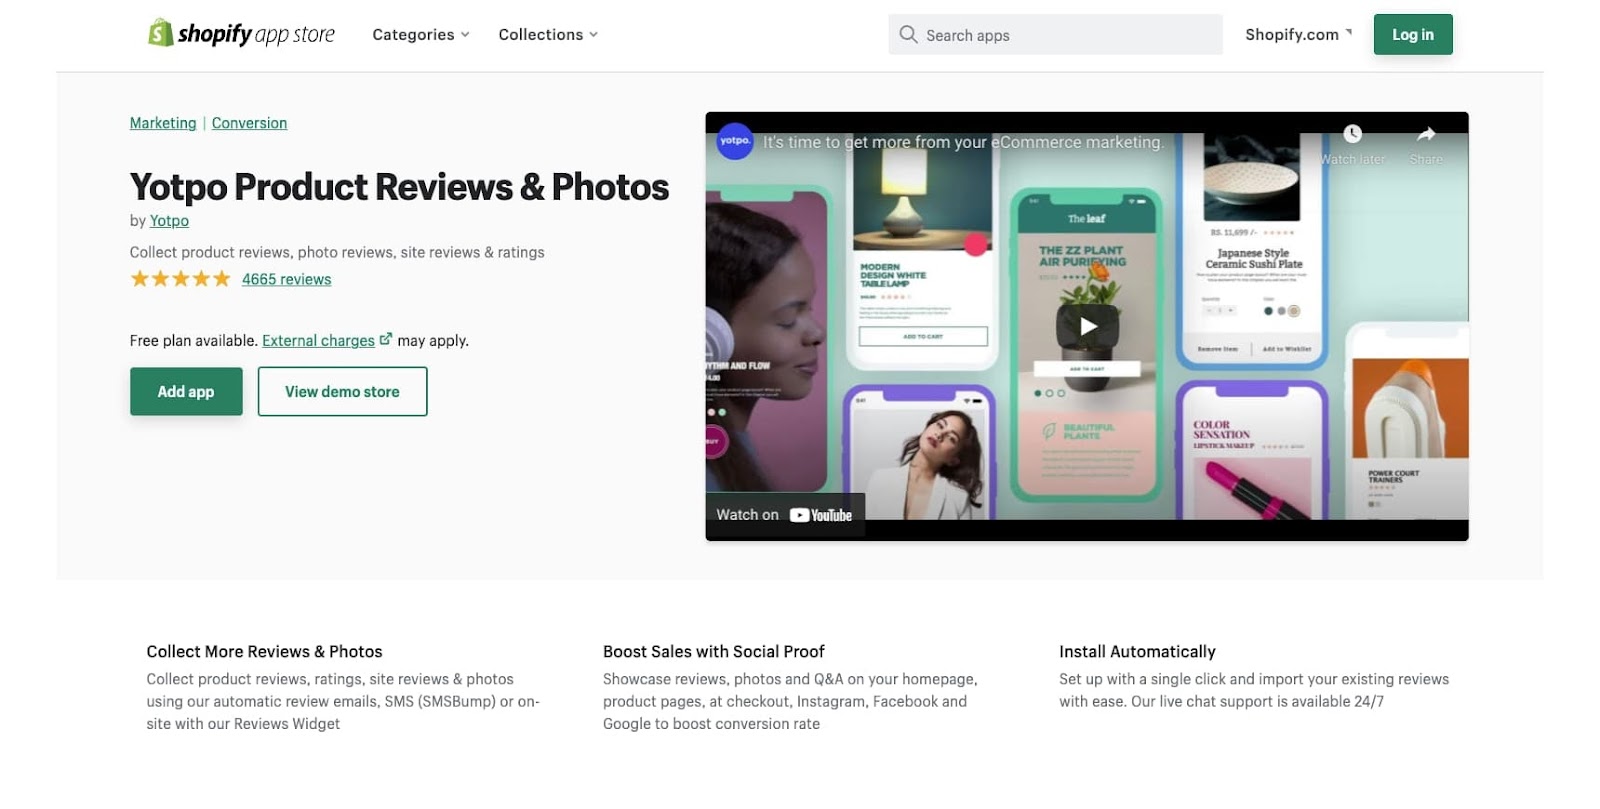 yotpo review app shopify apps